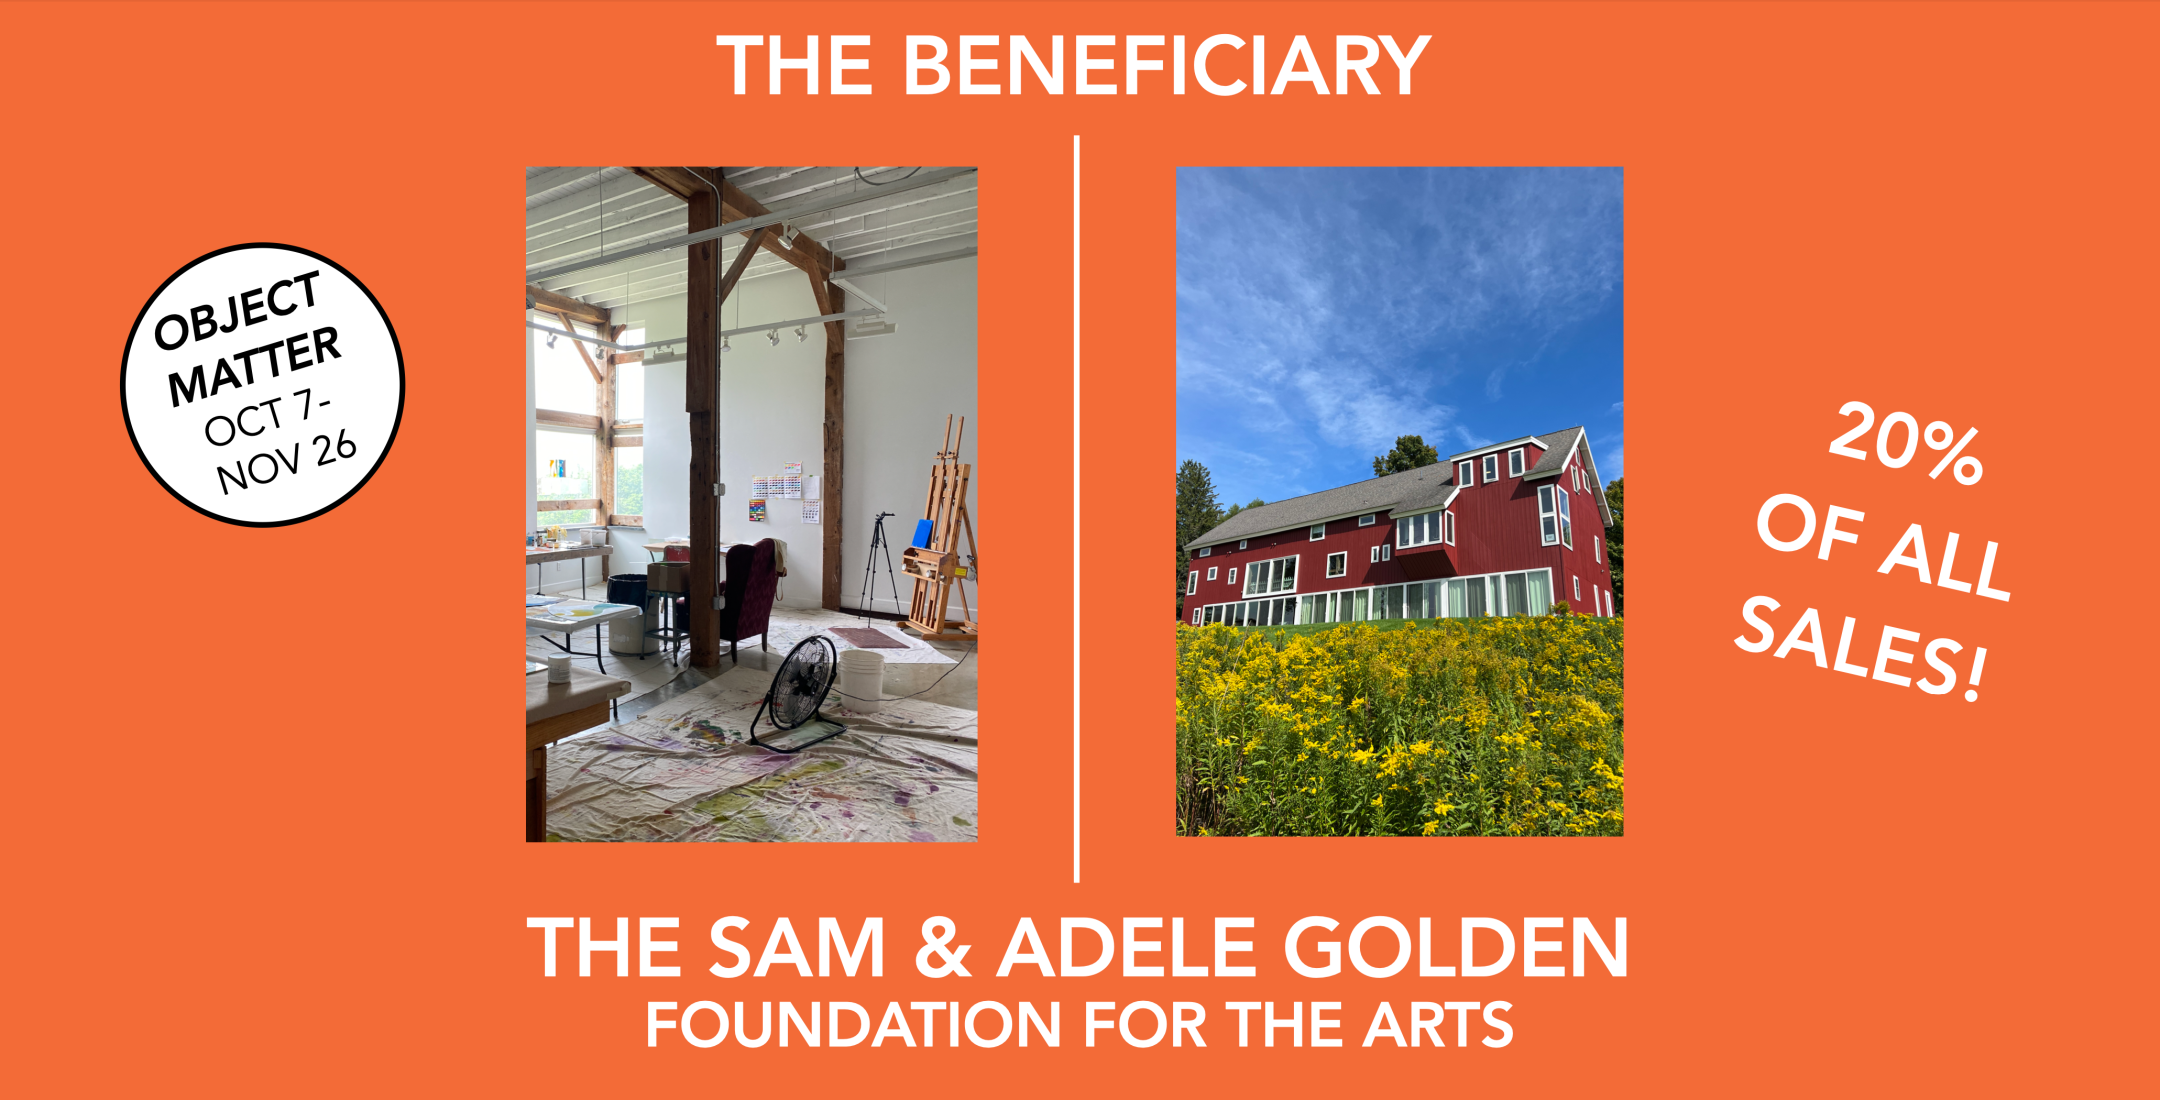 The Sam &amp; Adele Golden Foundation for the Arts is the philanthropic beneficiary of all sales from the exhibition &quot;Object Matter&quot; at Caldwell Gallery Hudson.